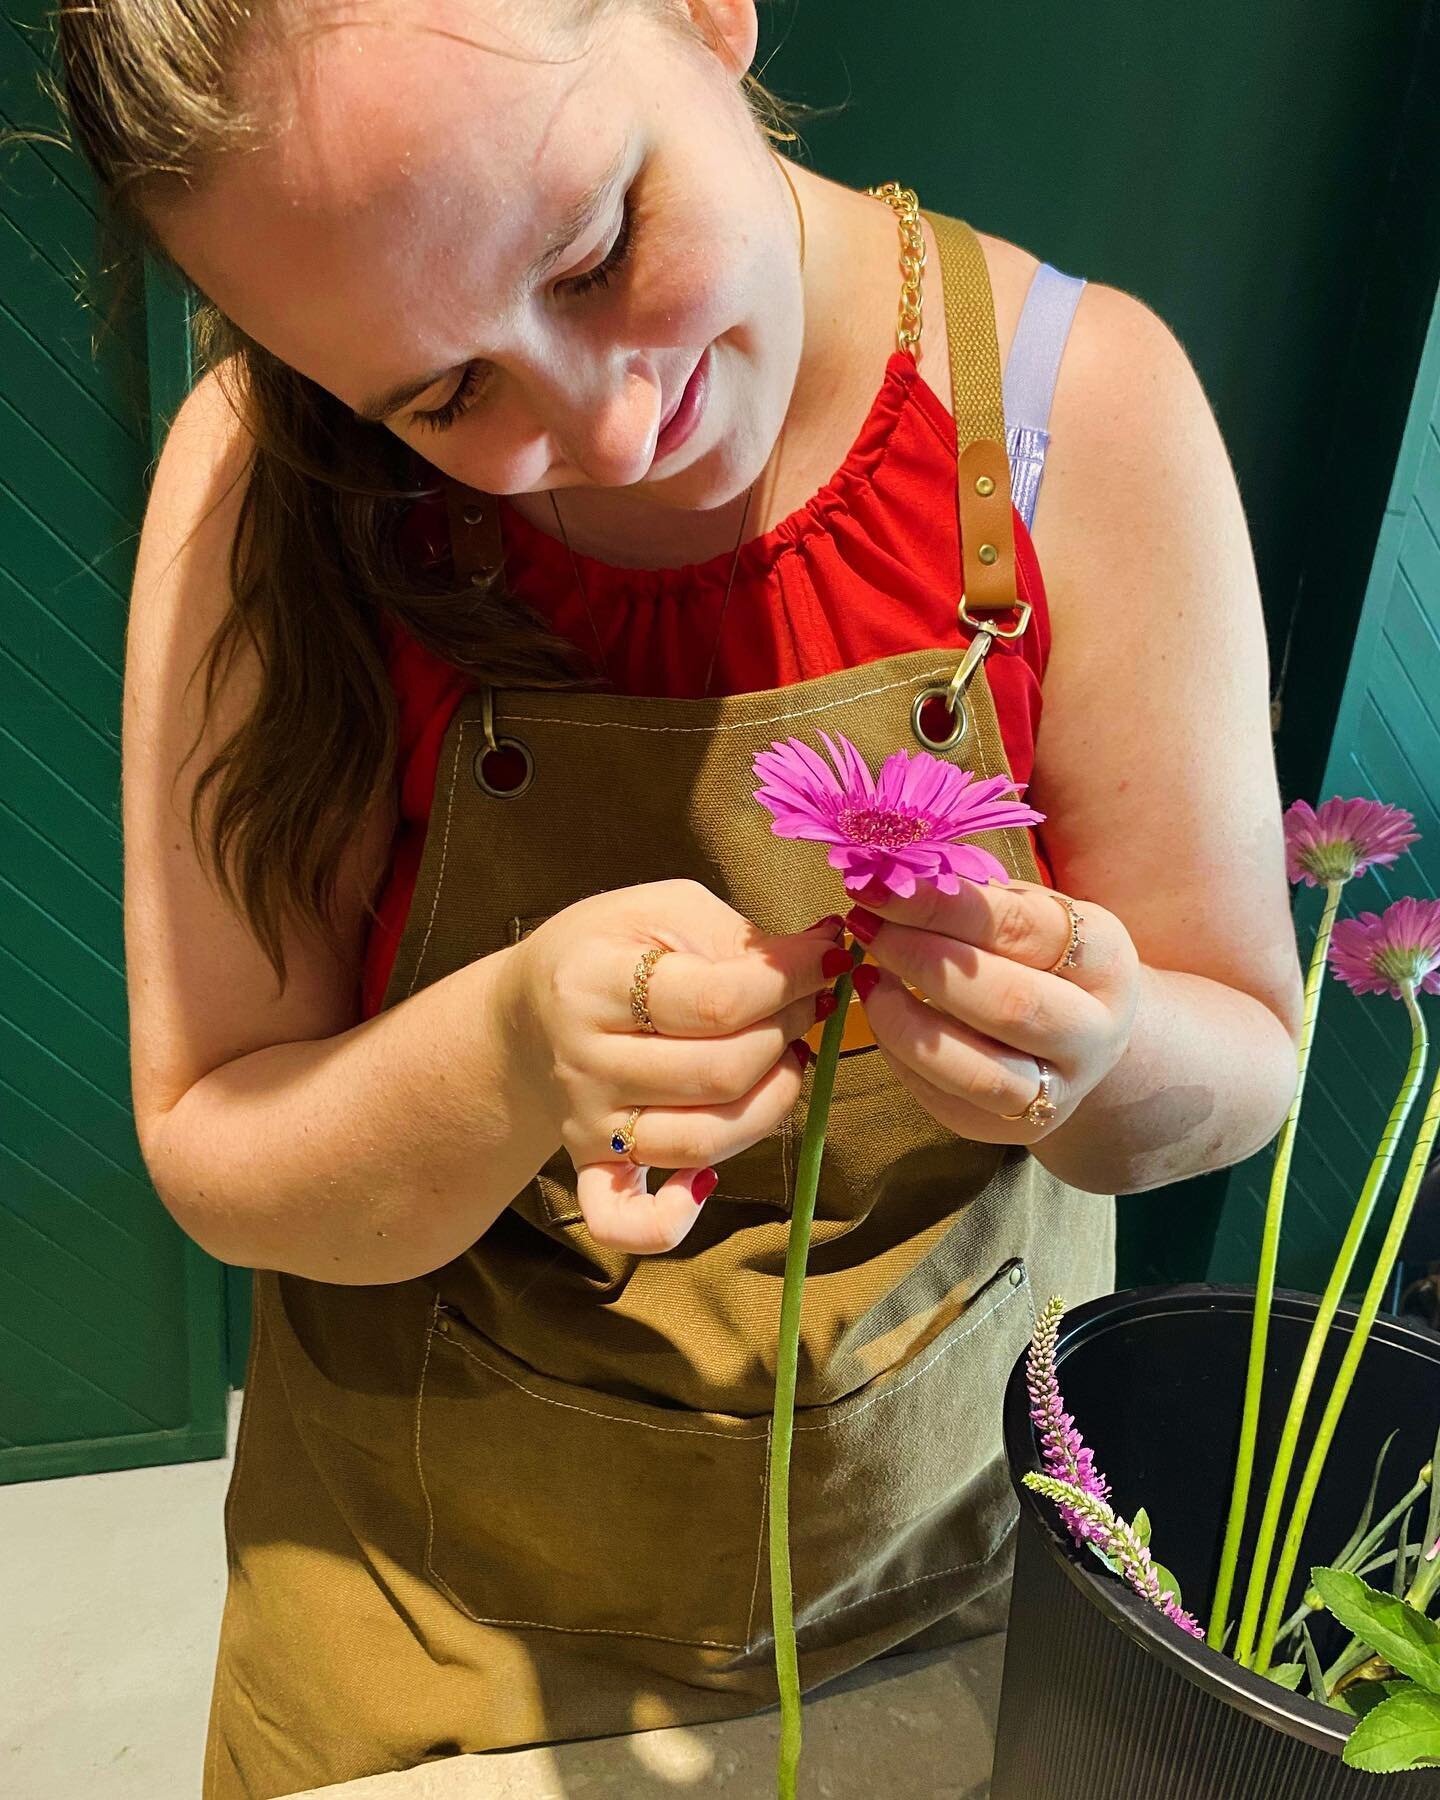 Our NDIS florist course is in full swing and our lovely students are thoroughly enjoying learning the art of basic floral care on day 1 and doing their first bouquets. Next week we get to visit a flower farm, flower markets and move to more flower va